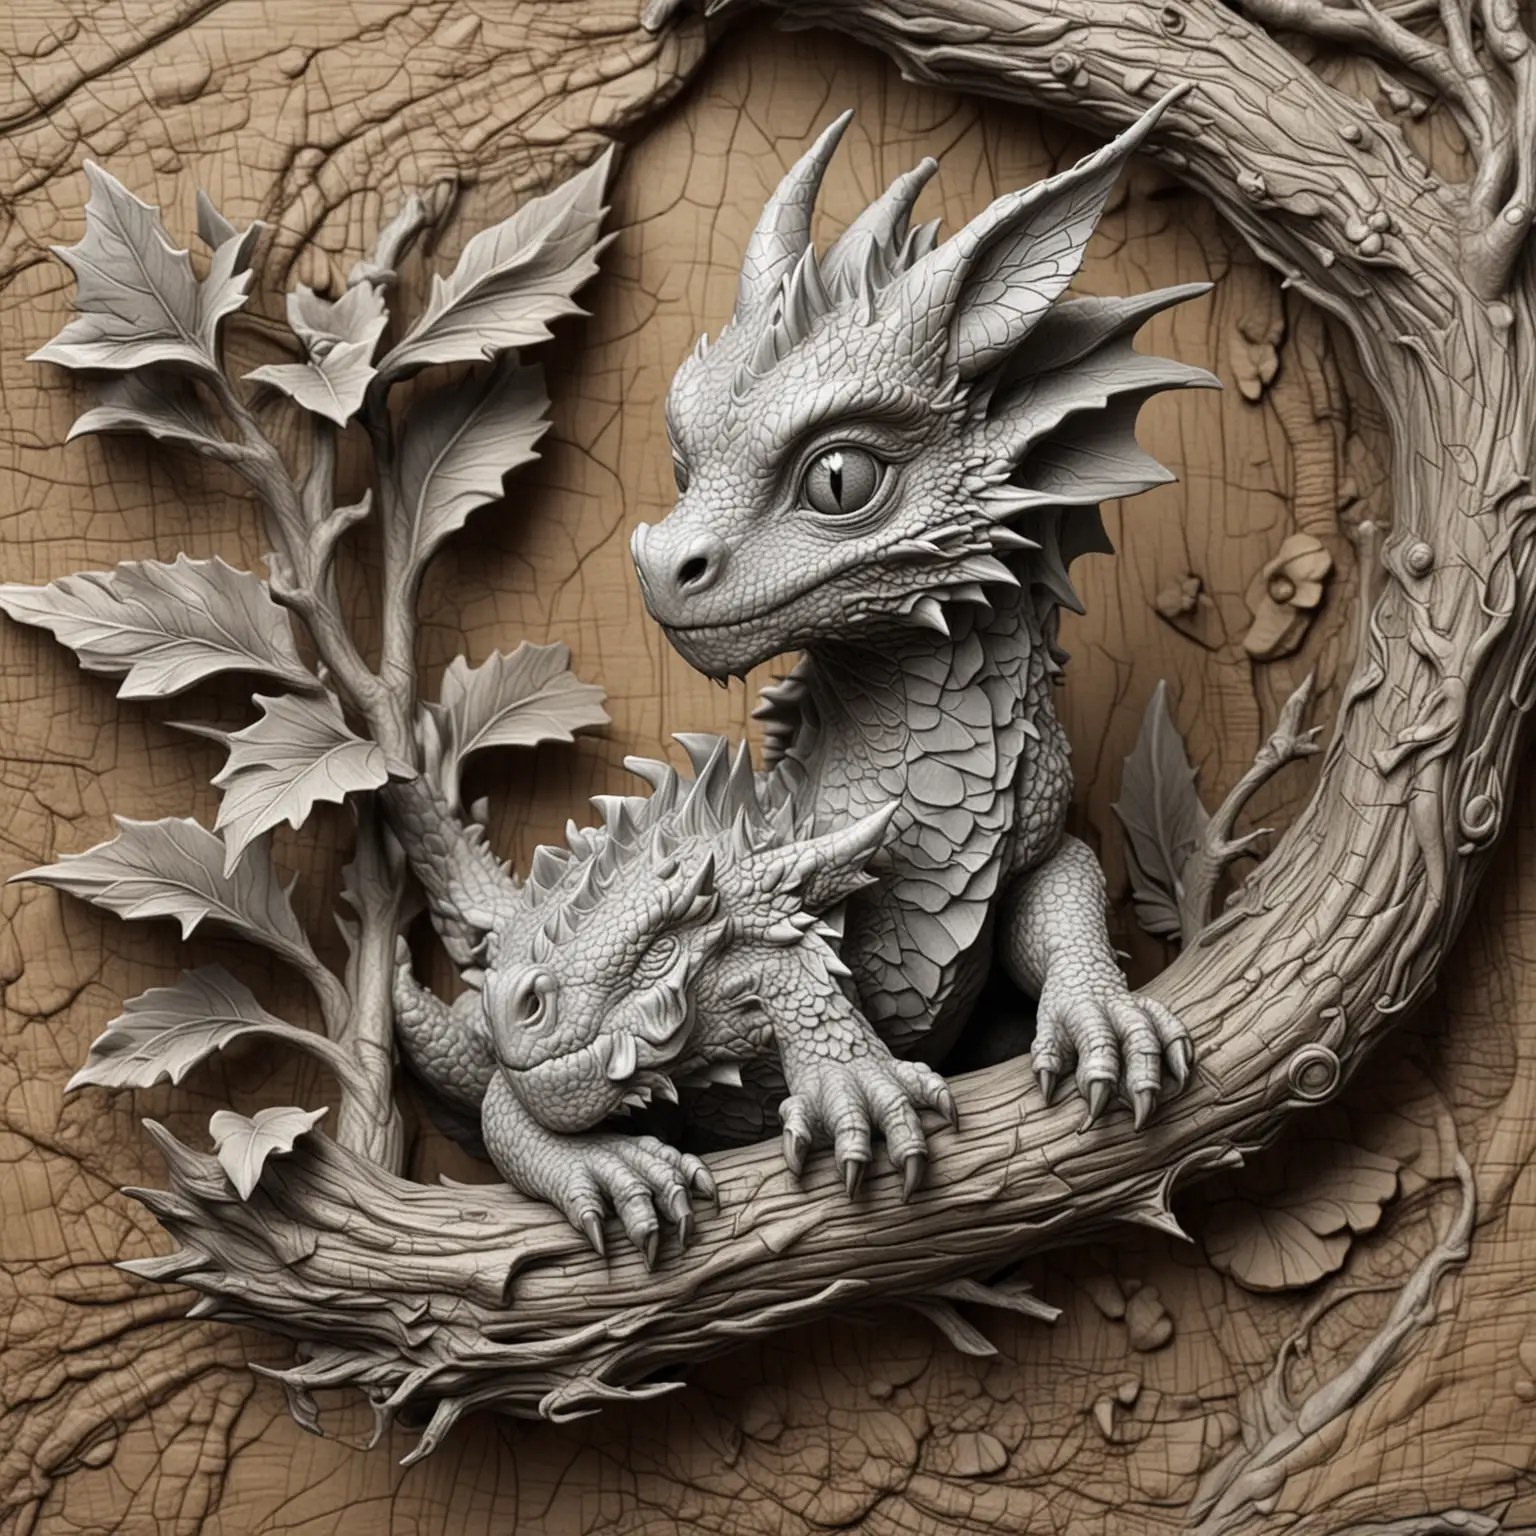 Baby Dragon Bas Relief Sitting on Branch 3D Effect Grayscale Laser Engraving